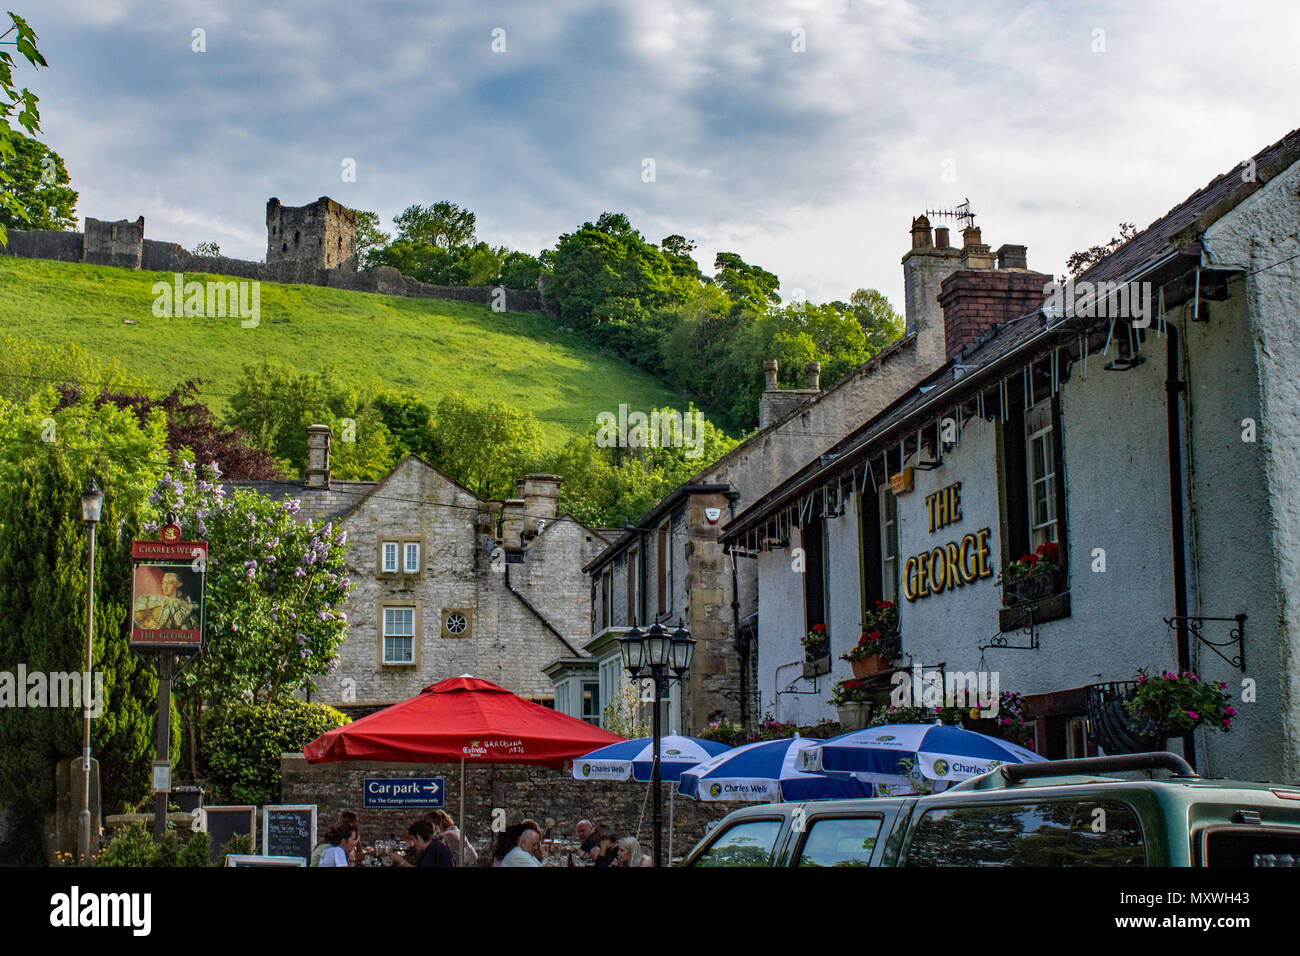 The George Inn, Castleton in the Peak District is overlooked by the ruin of Peveril Castle Stock Photo